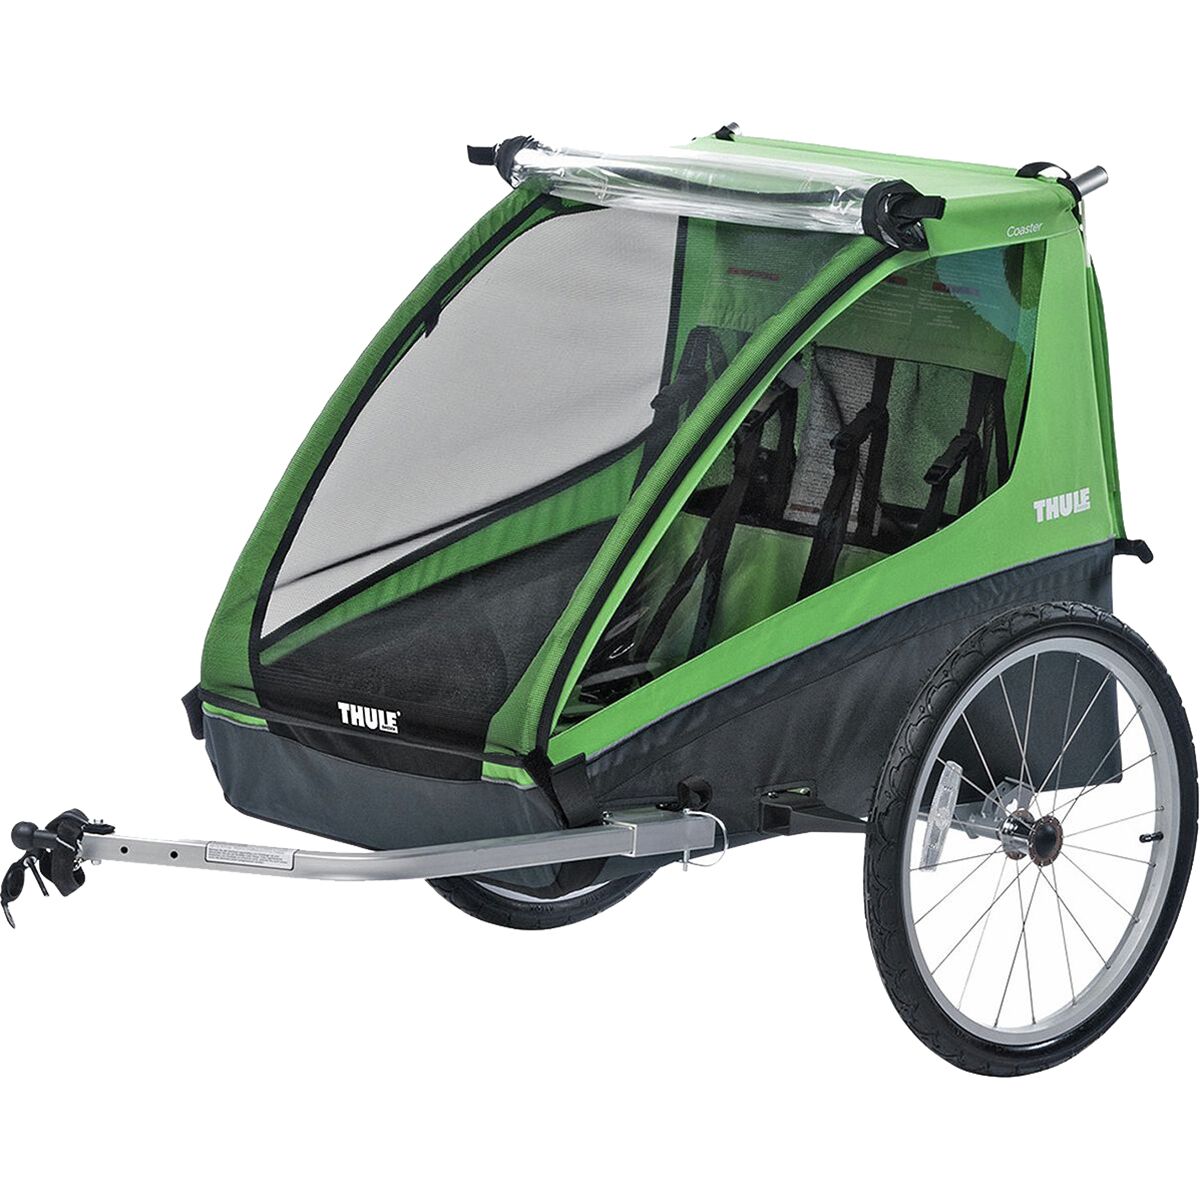 Thule Chariot Cadence 2 with Bicycle Trailer Kit Cycle Green